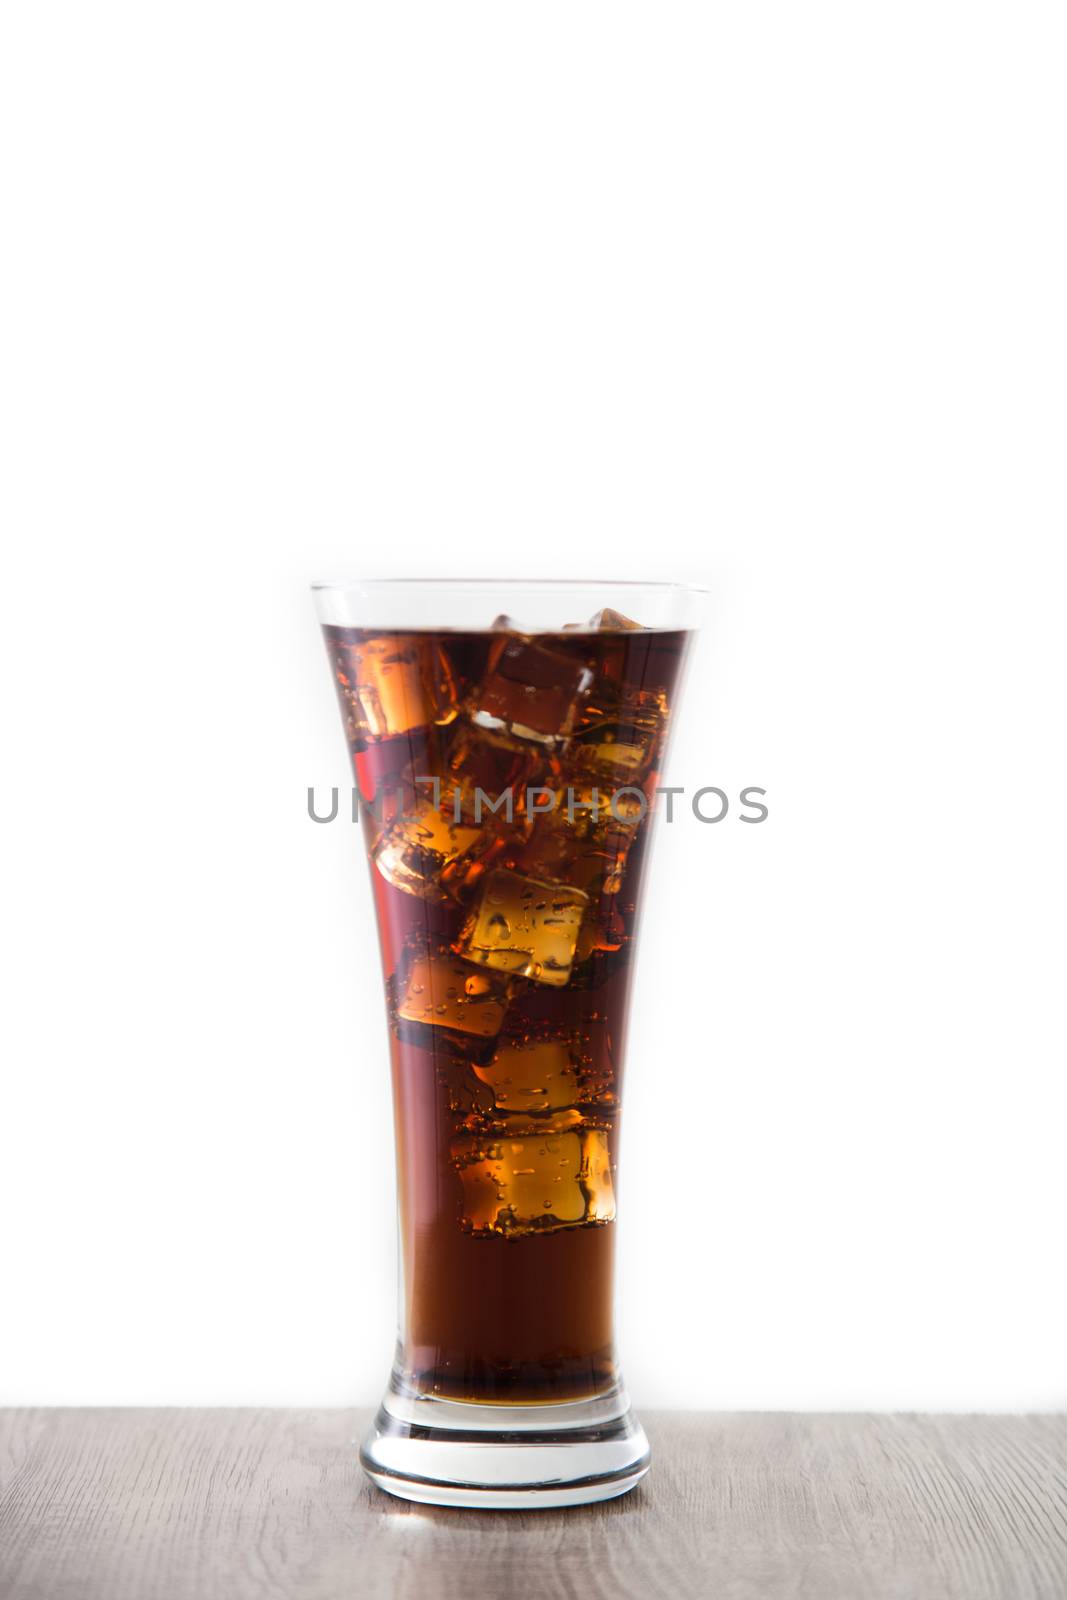 a glass of soft drink on wooden table